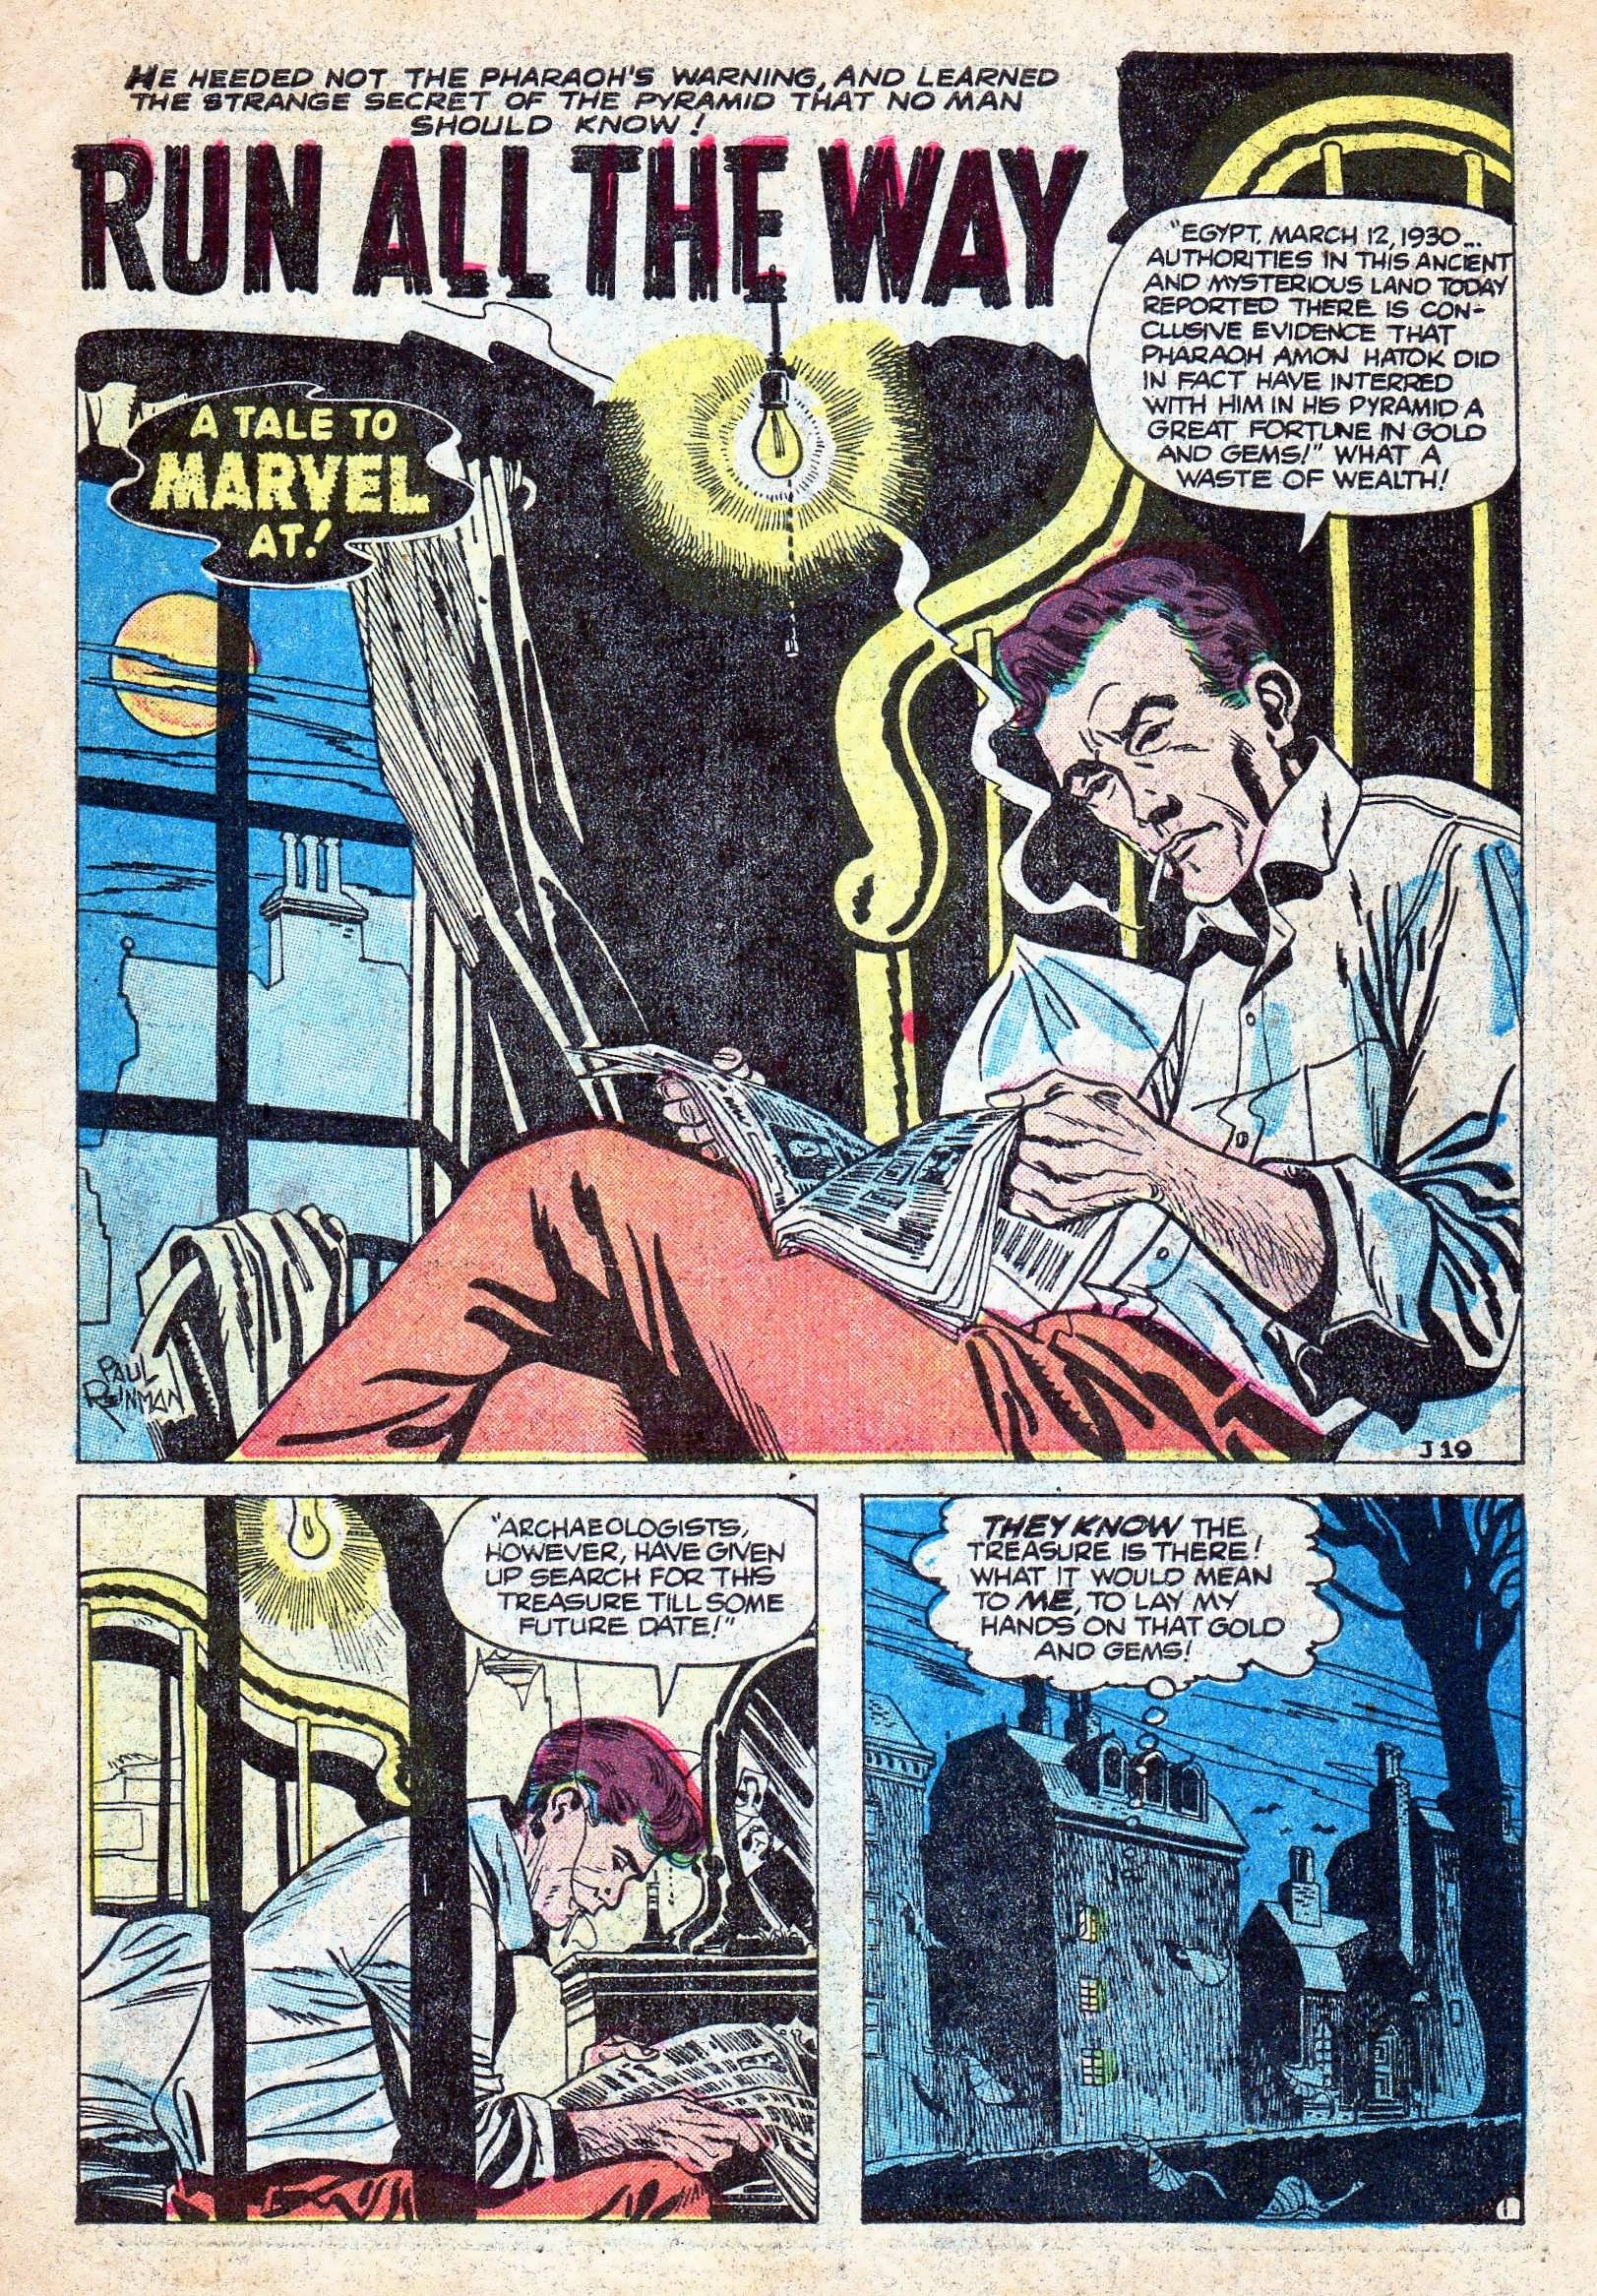 Marvel Tales (1949) 145 Page 2